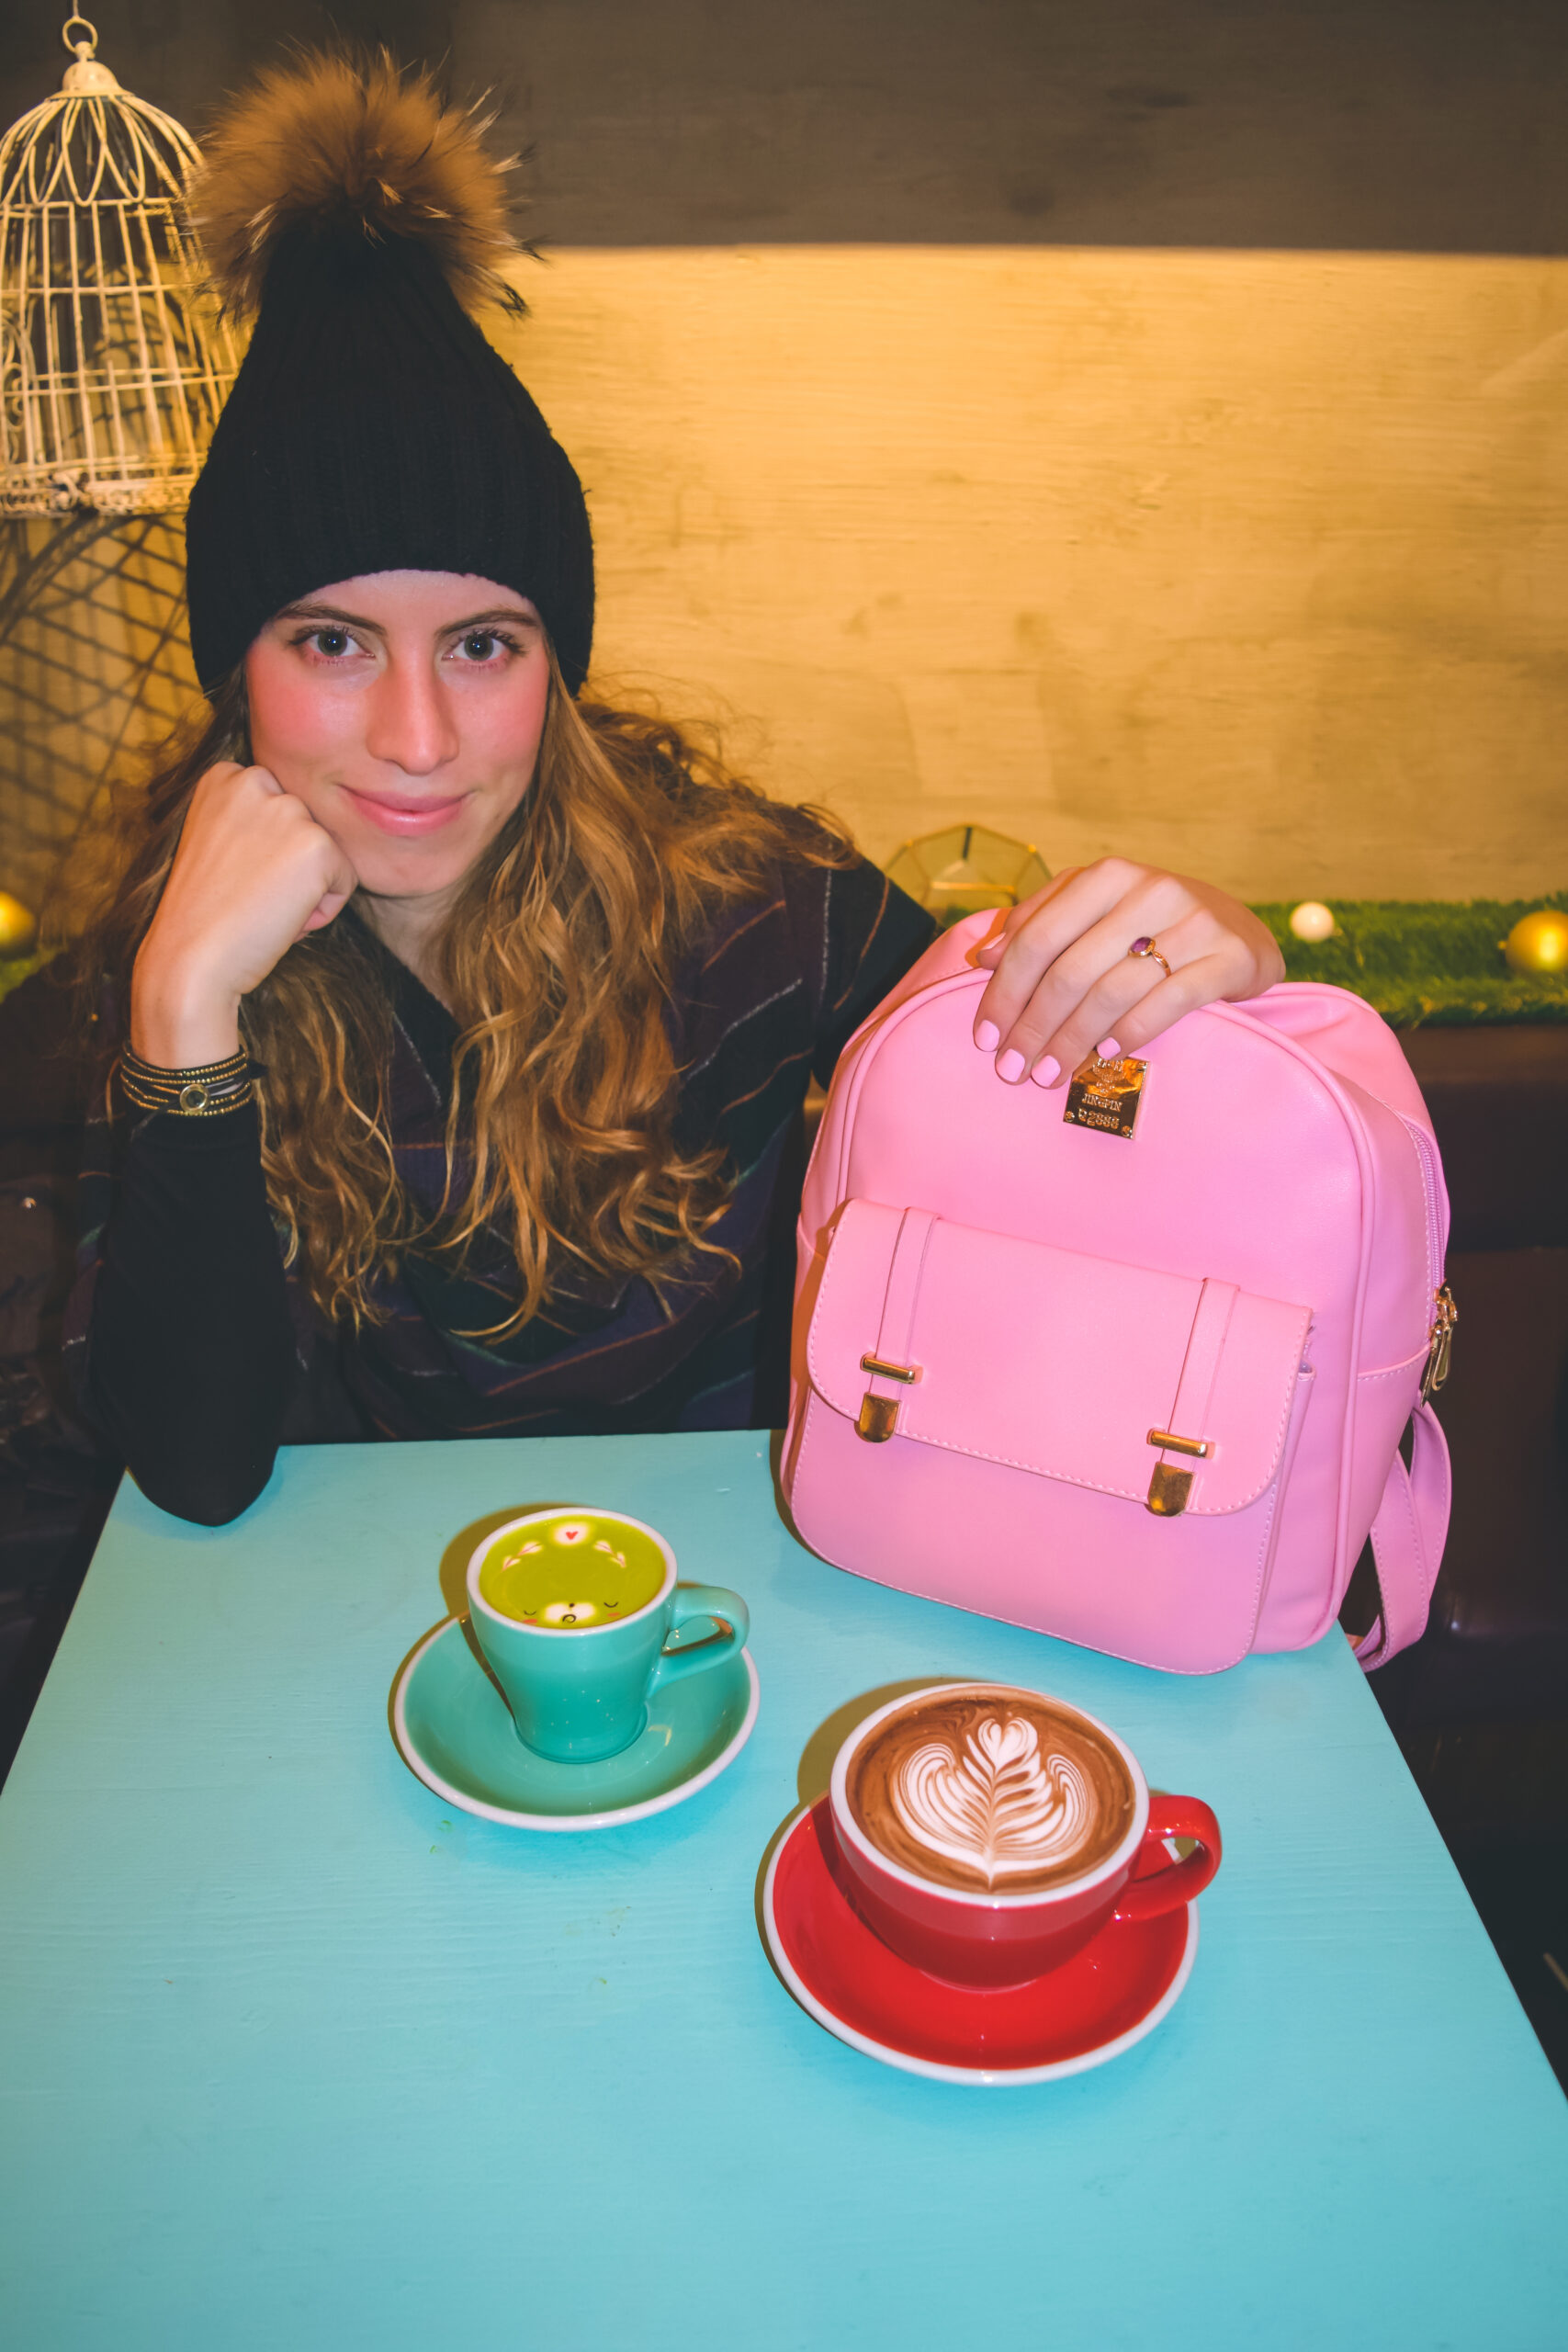 Bagail PU Leather daypack Treat Yourself To A Sweet Moment In NYC manhattan where to eat instagrammable food foodie weet moments lower east side china town hot chocolate art latte art travel blog guide manhattan new york travel what to do